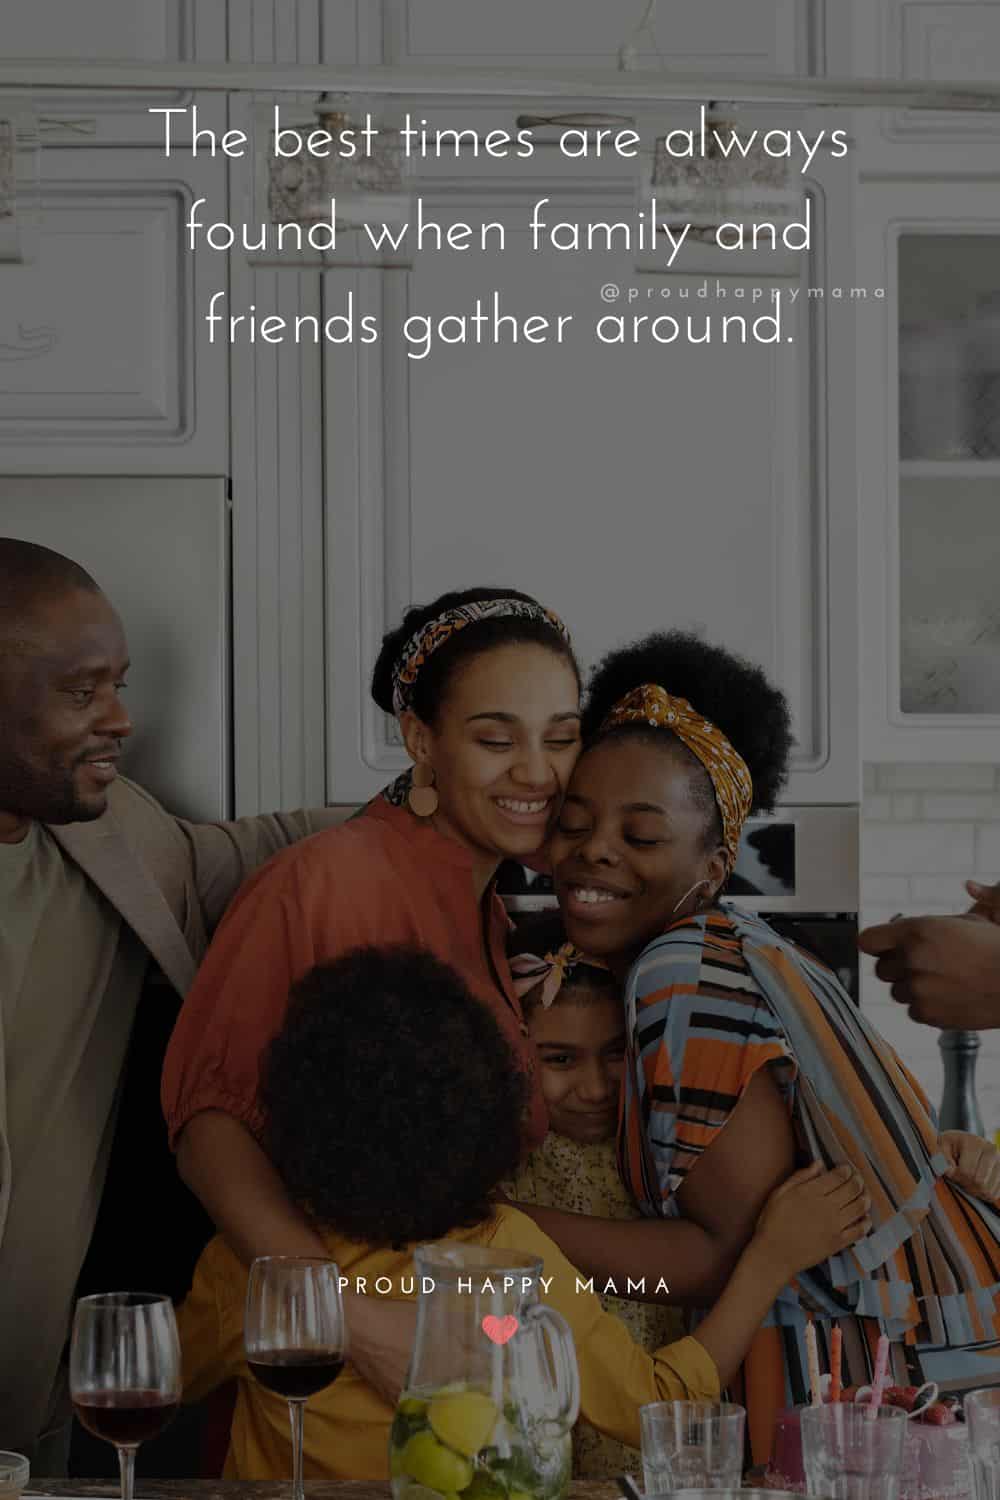 time with family quotes - the best times are always found when family and friends gather around